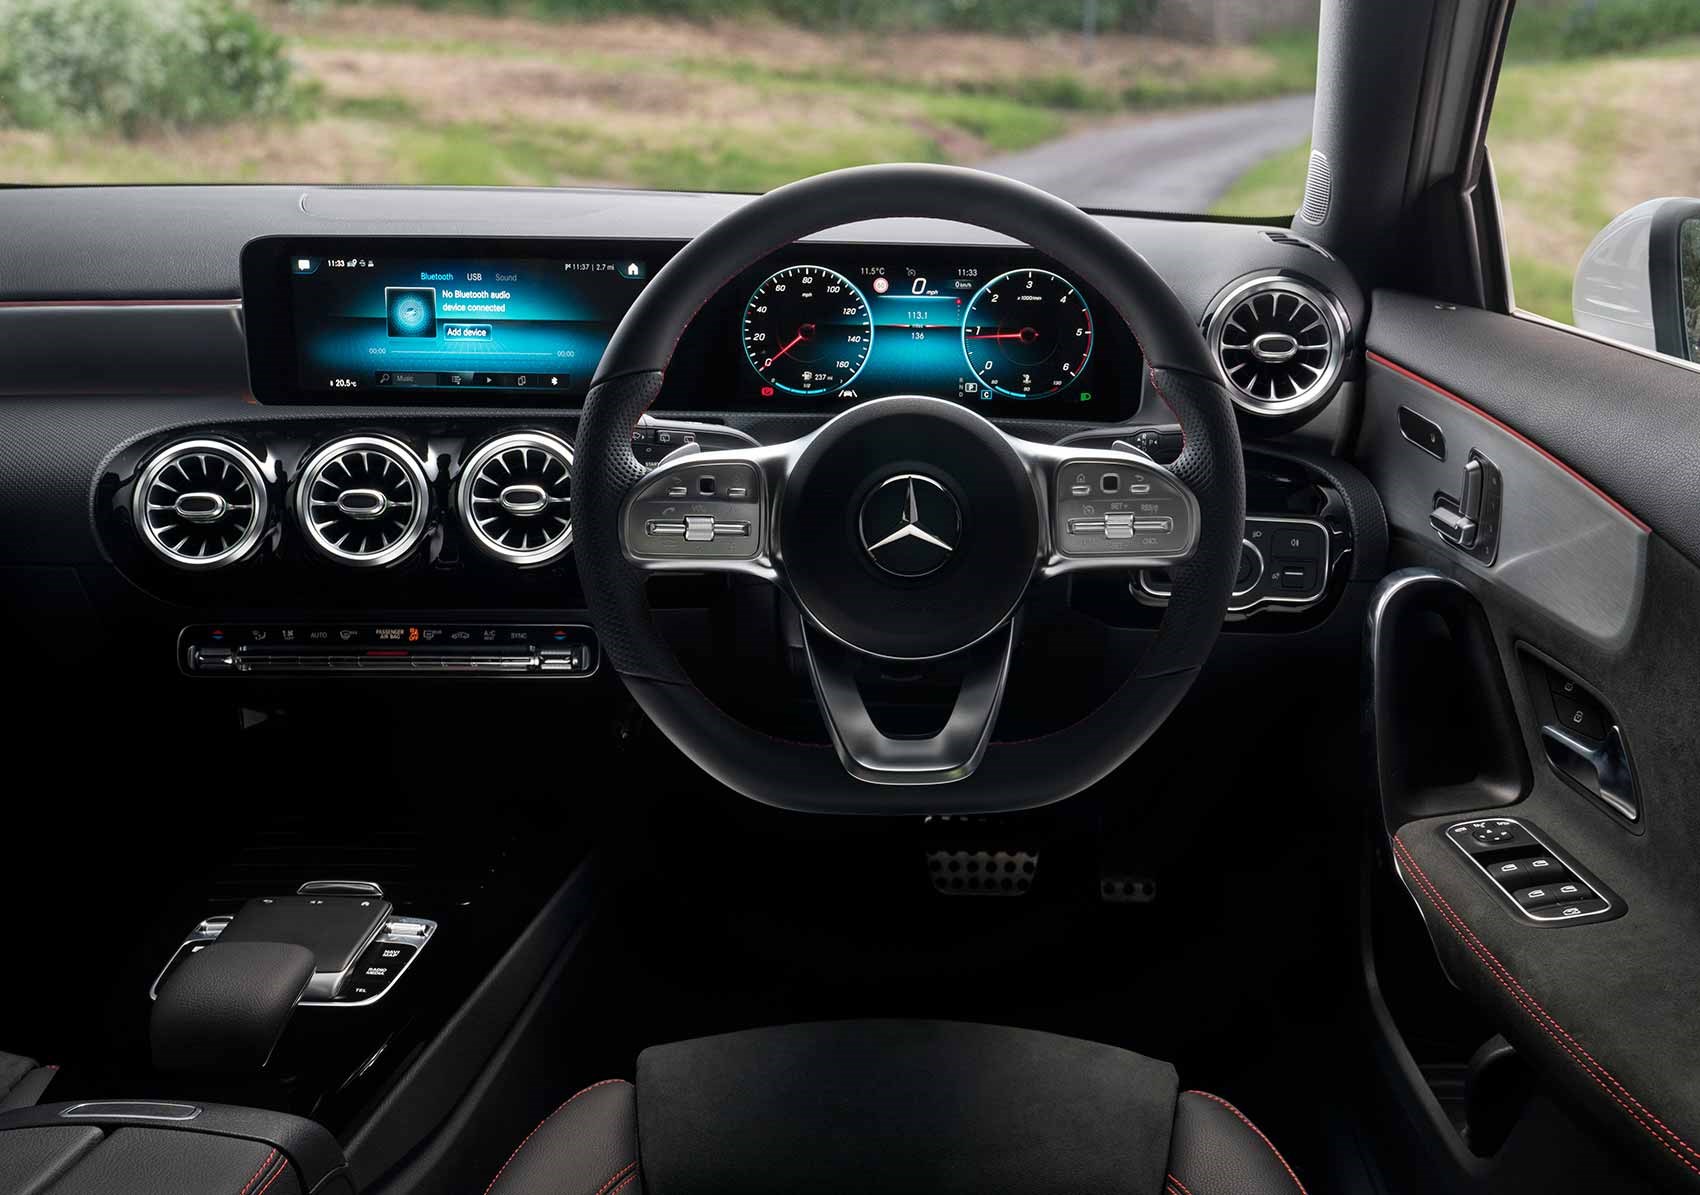 New Mercedes-Benz A-class interior and cabin: stunning digital dials a must-have option